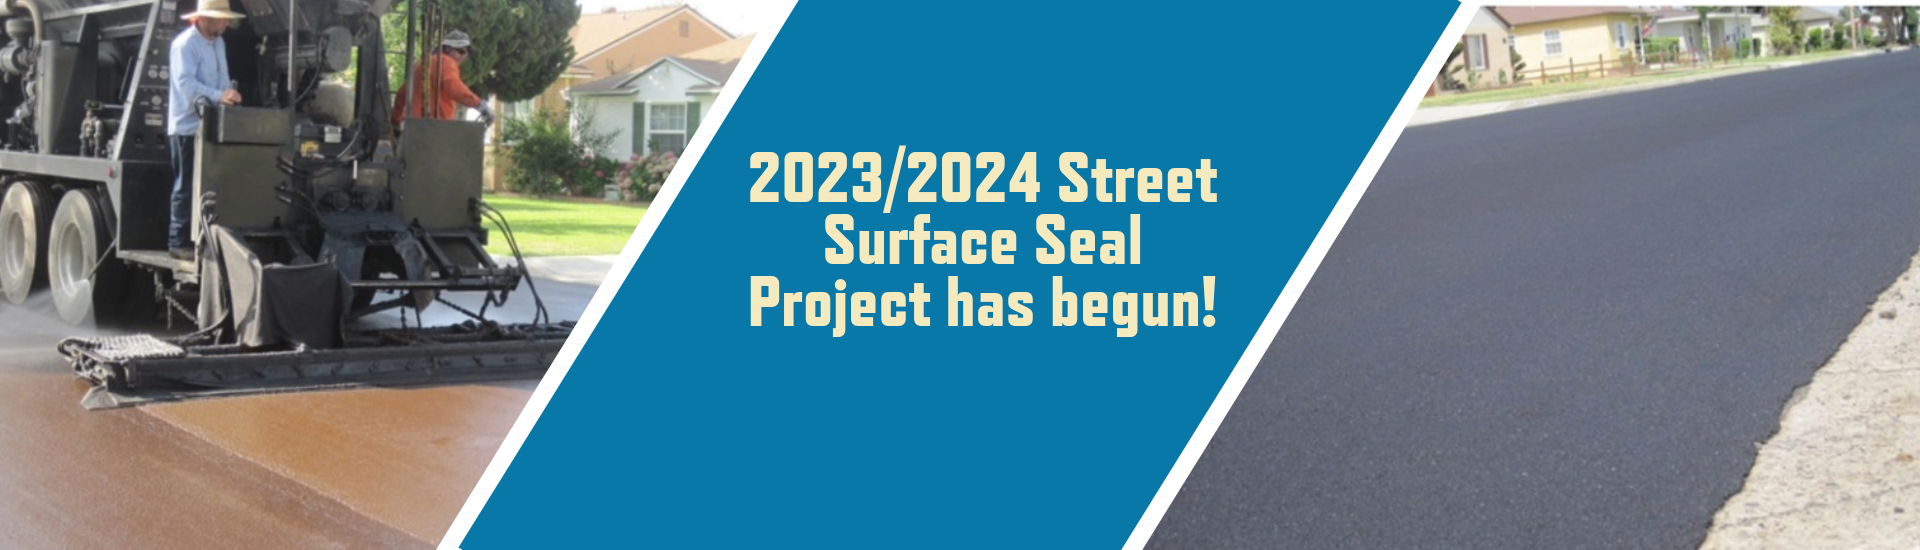 Street Surface Seal Project 